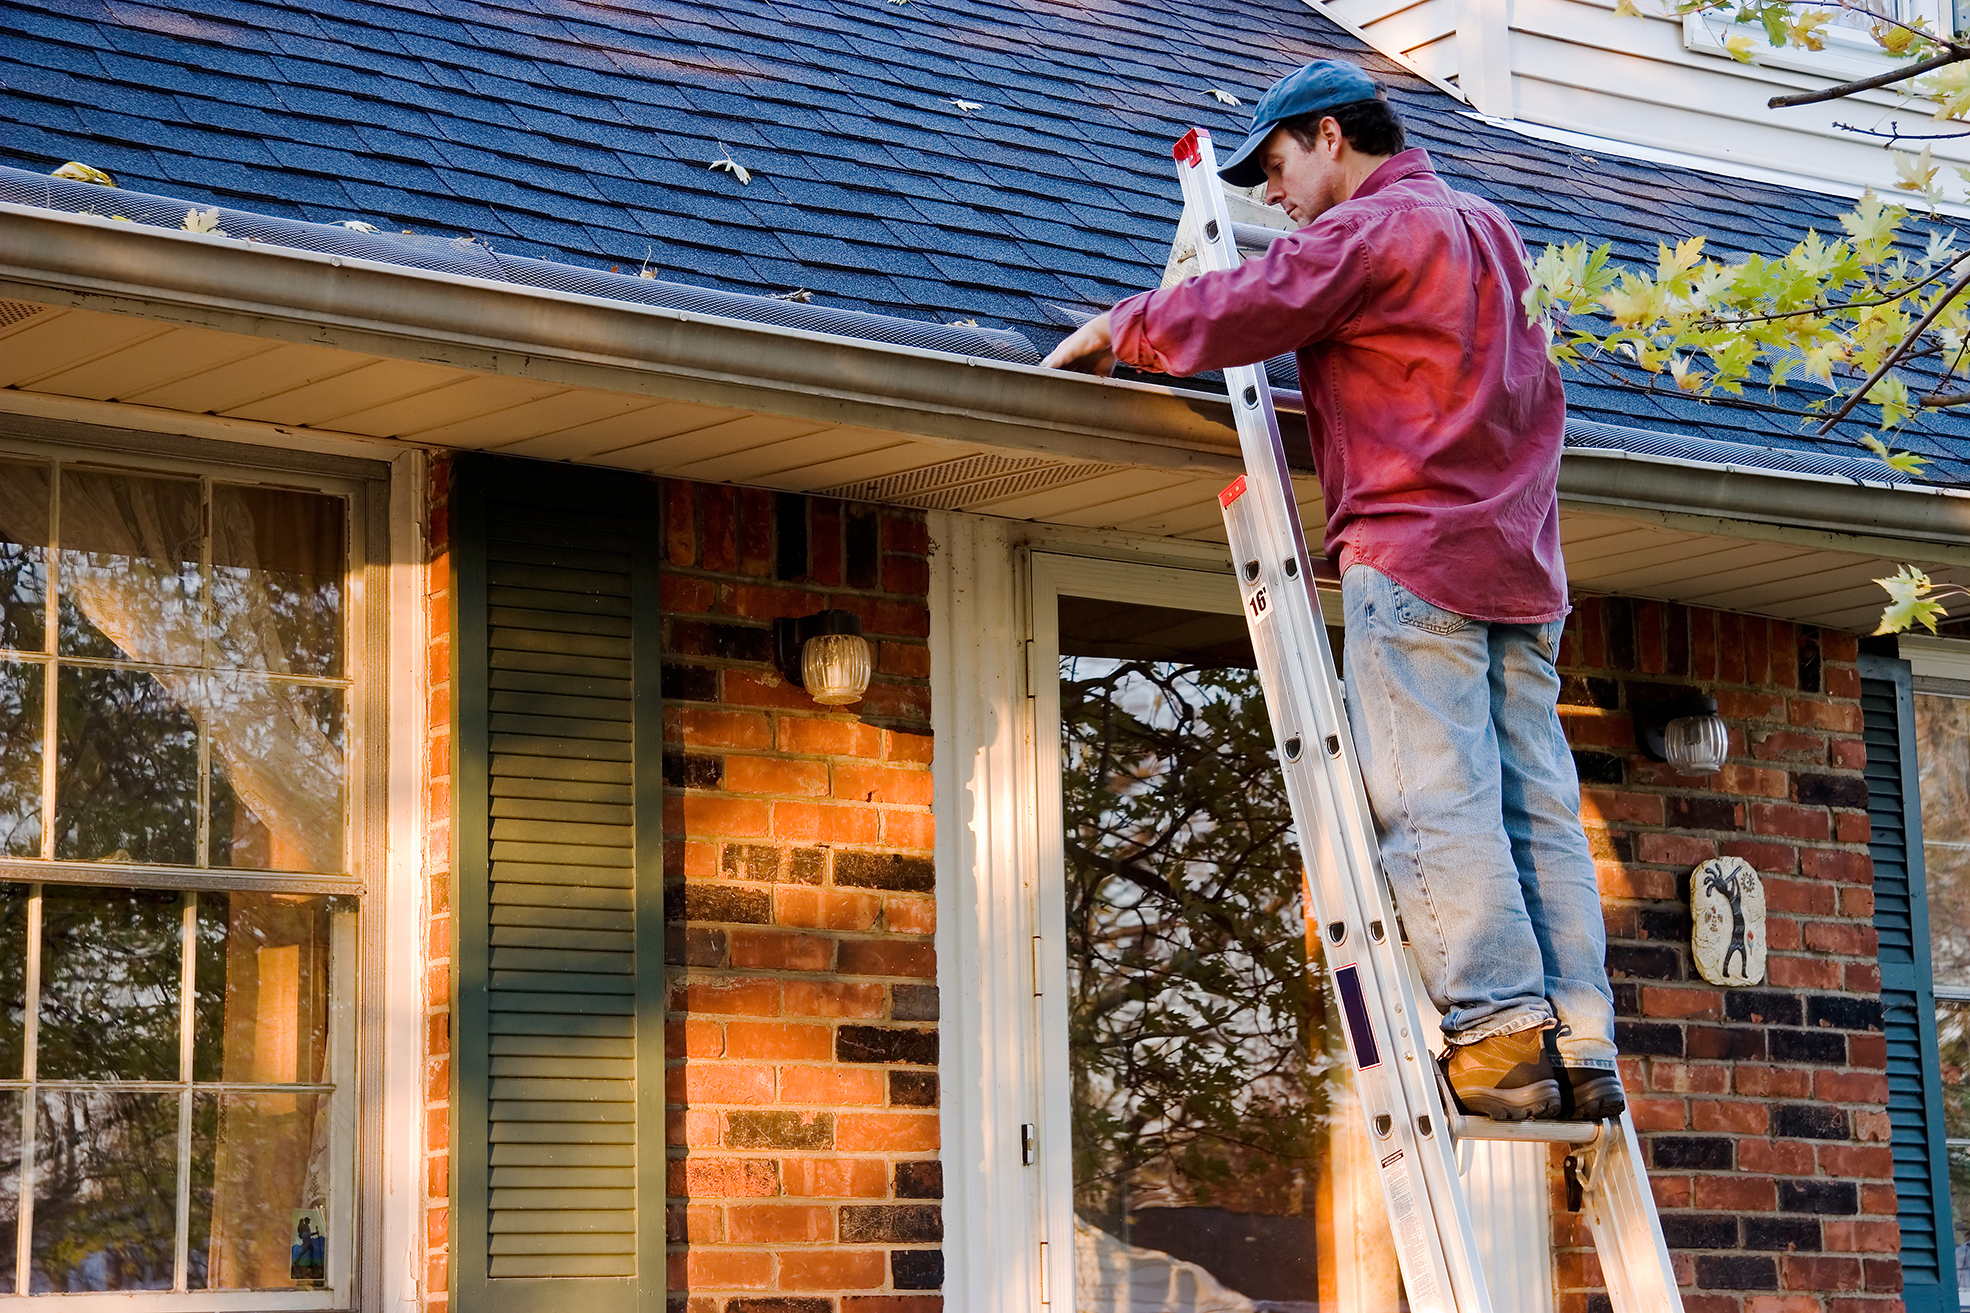 Your Seasonal Home Maintenance Checklist Based on Where You Live: Get the House Ready to Sell in Any Climate